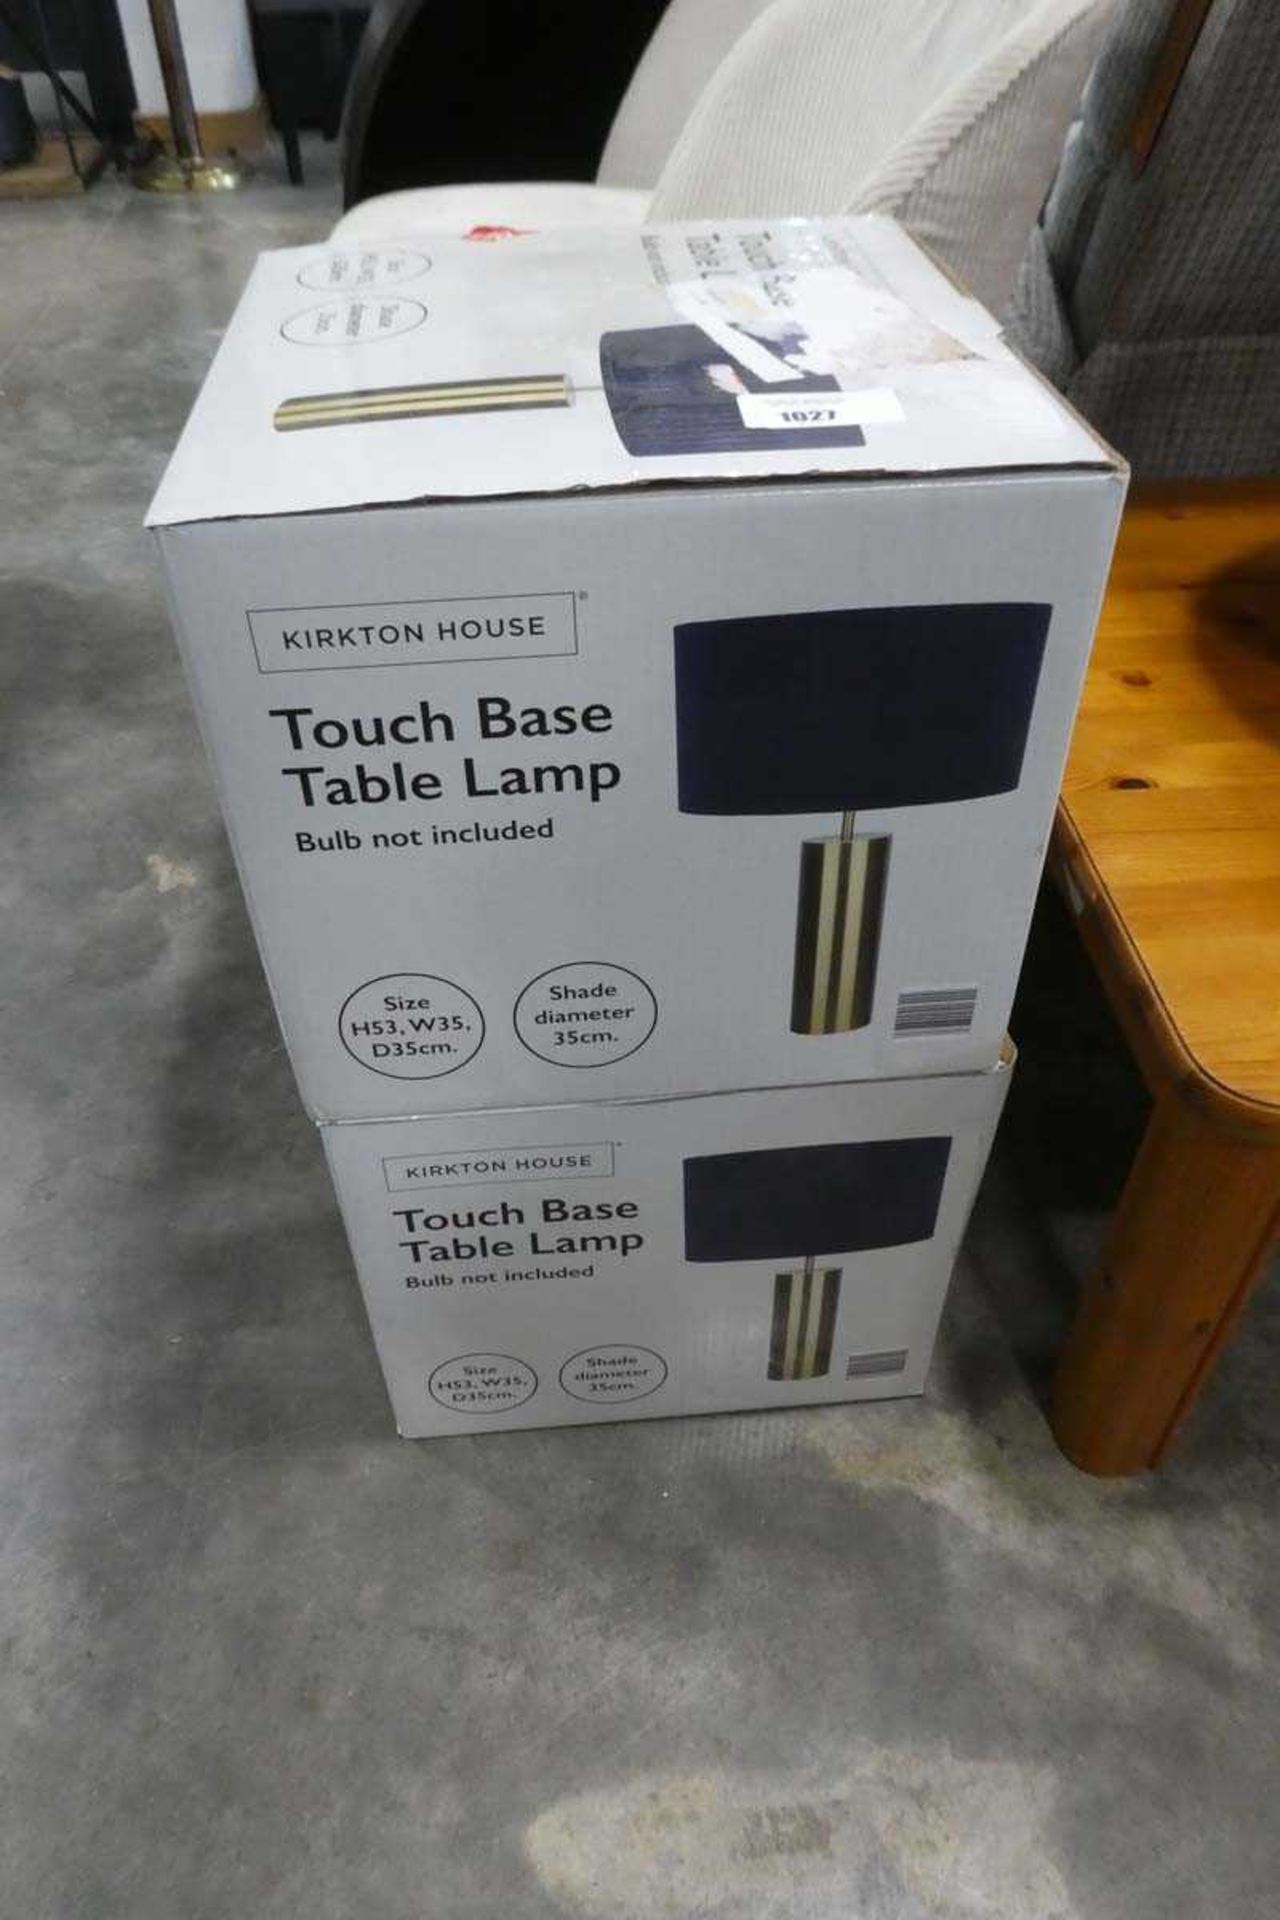 +VAT 2 boxed touch base table lamps